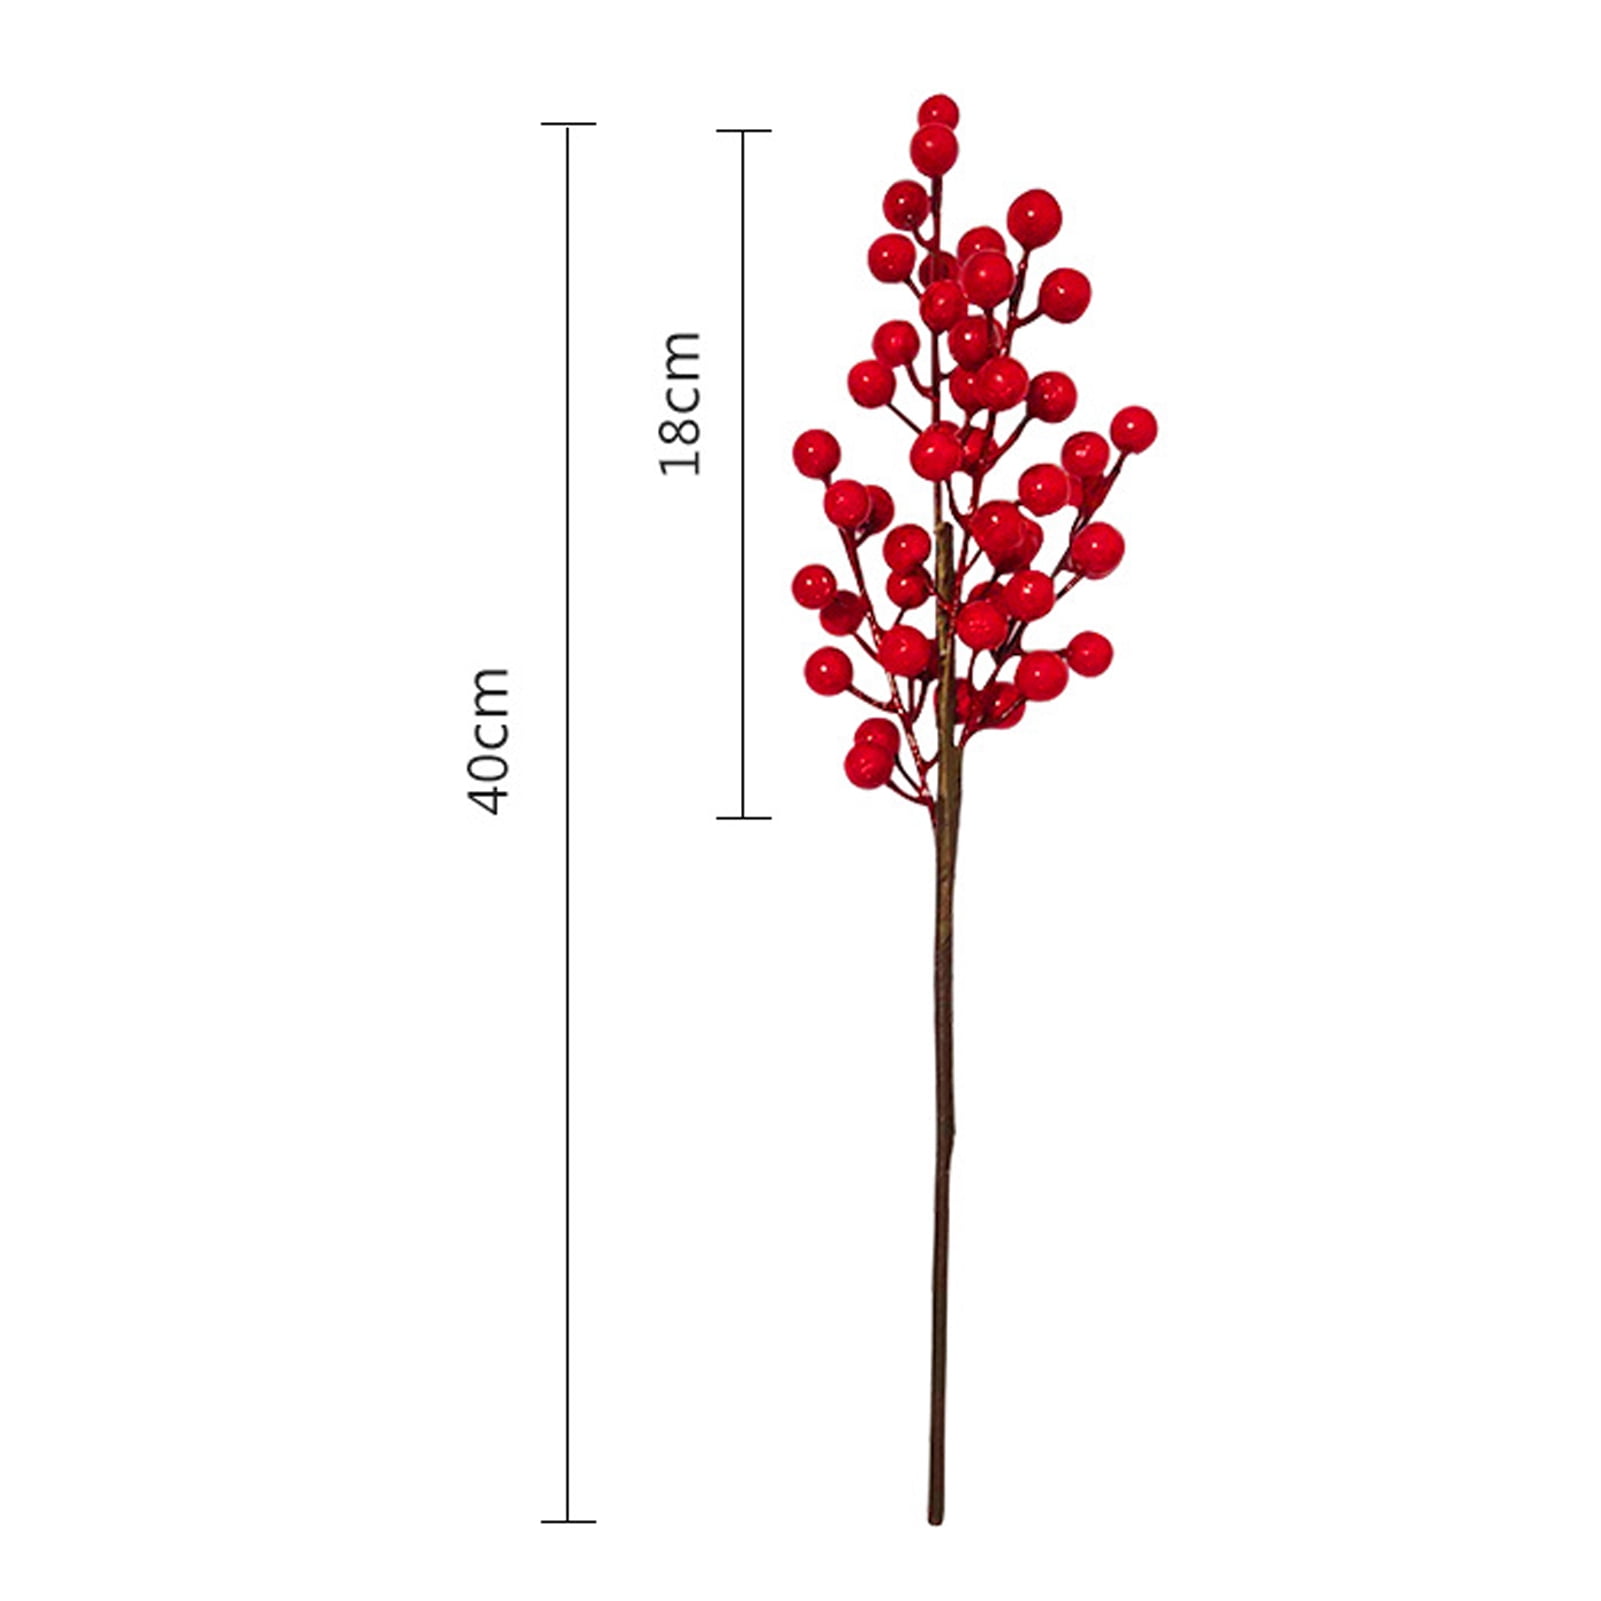 Cheers.US 10Pcs Artificial Red Berry Stems Branches, Fake Burgundy Berry  Picks Faux Holly Berries for Christmas Tree Xmas Wreath Decorations Floral  Arrangements, Halloween Holiday Home 